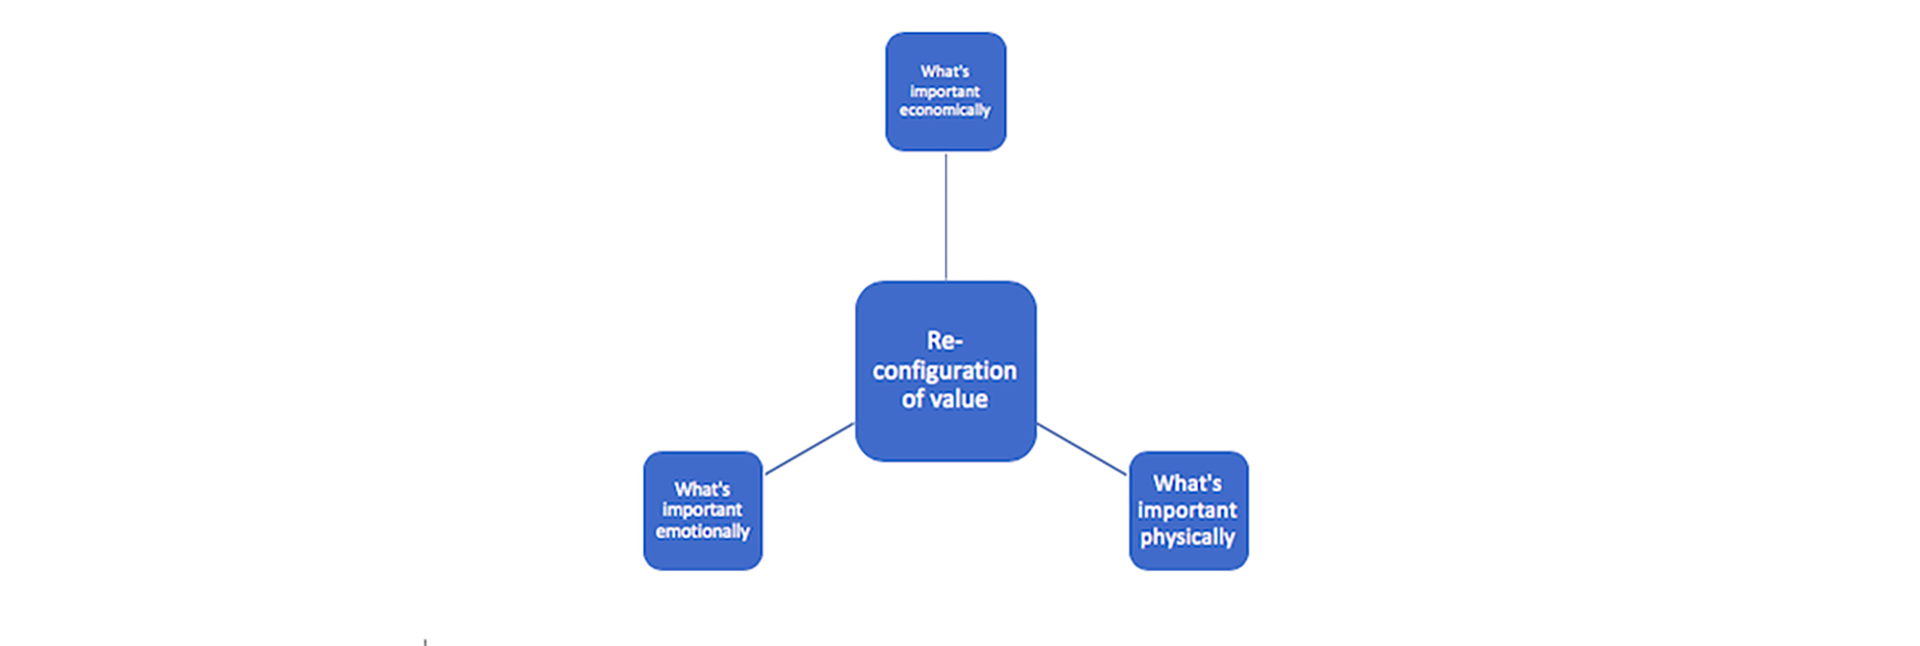 How can brands deliver great_value_